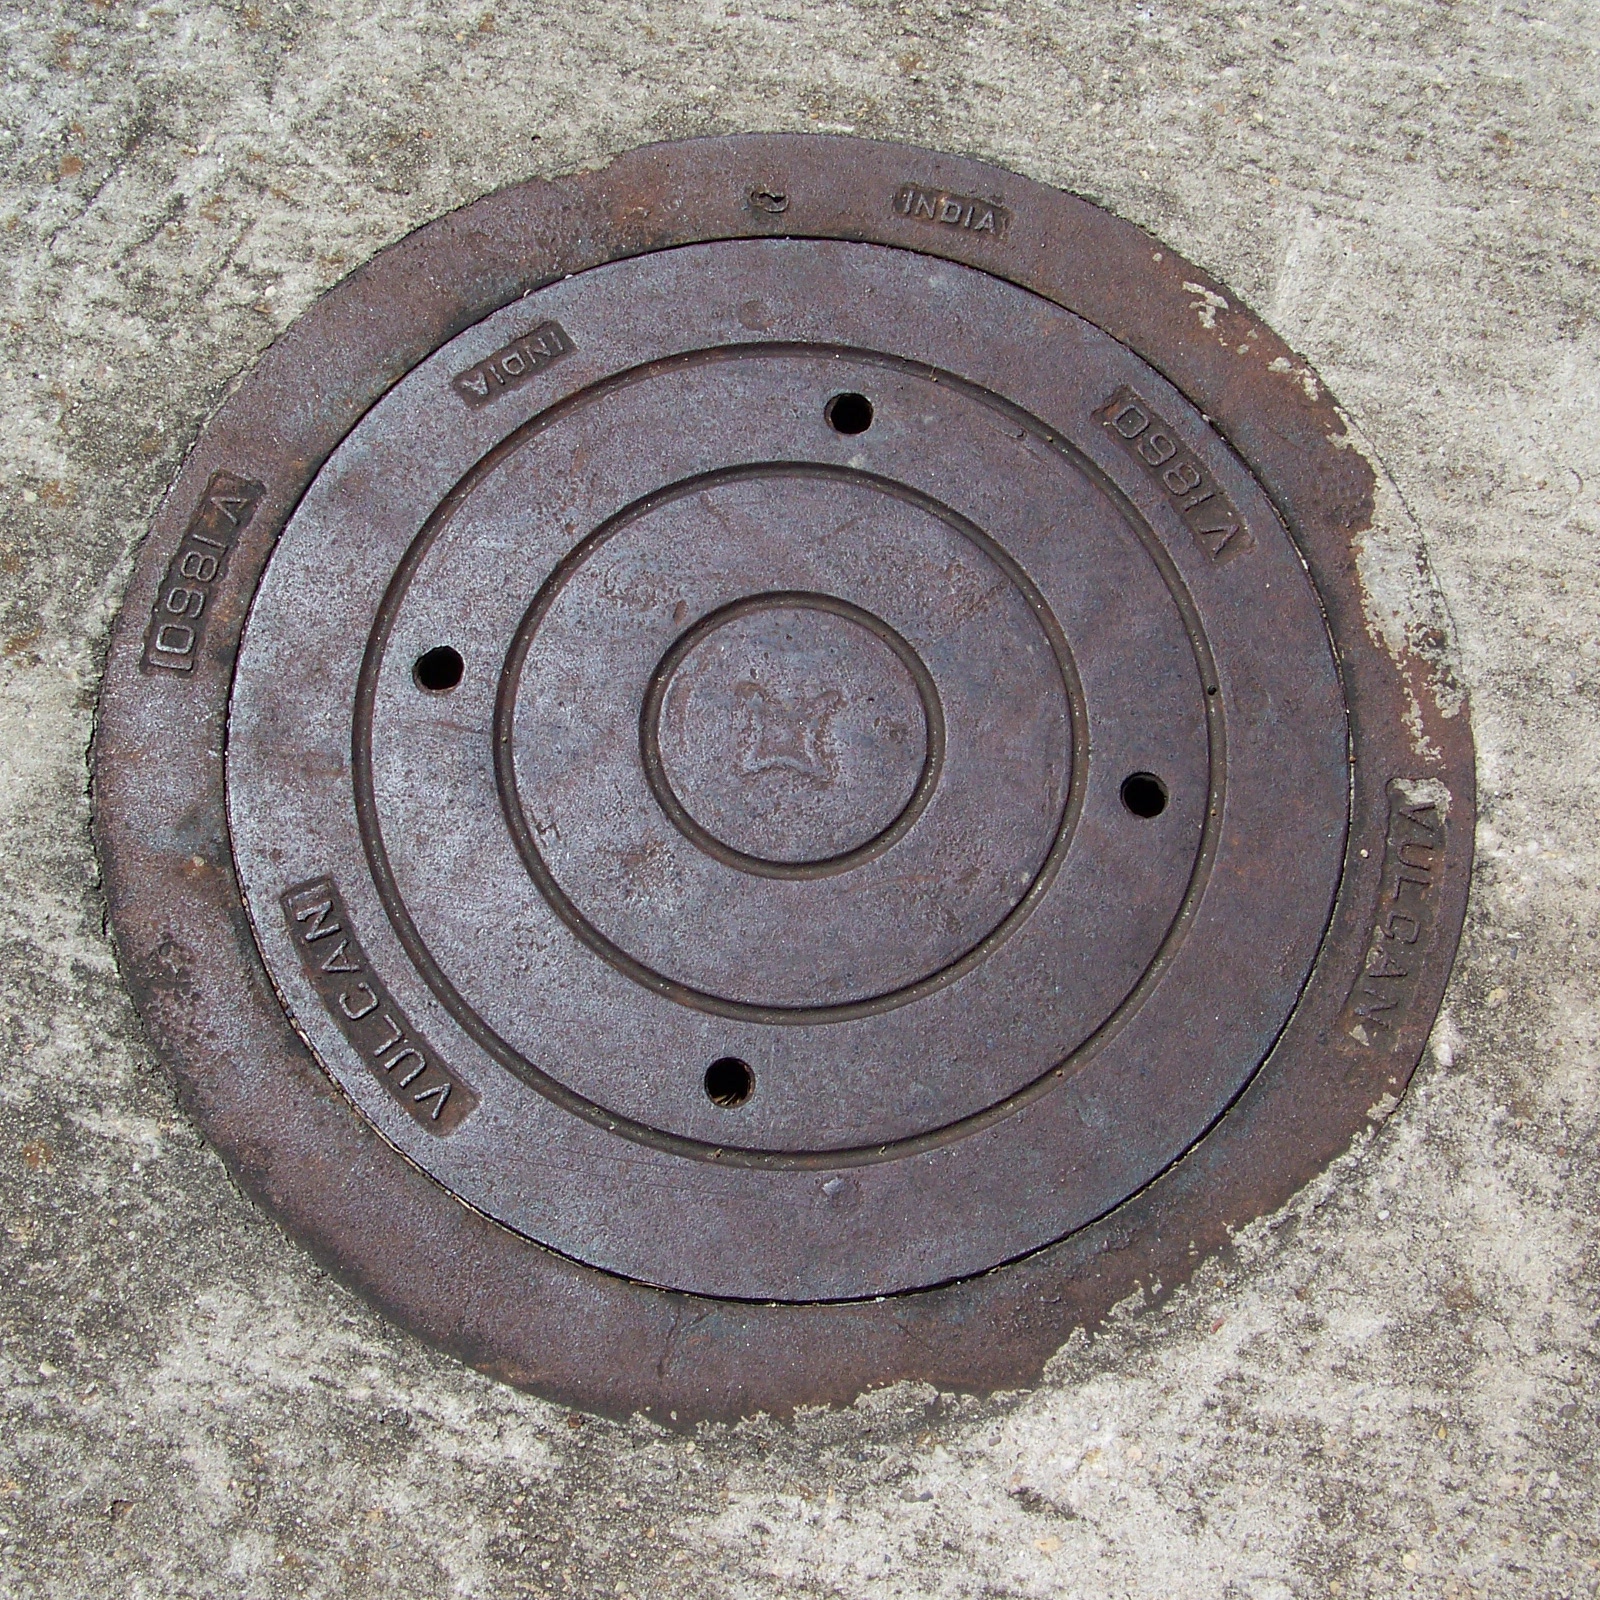 Indian-made manhole cover in the Alabama steel belt.